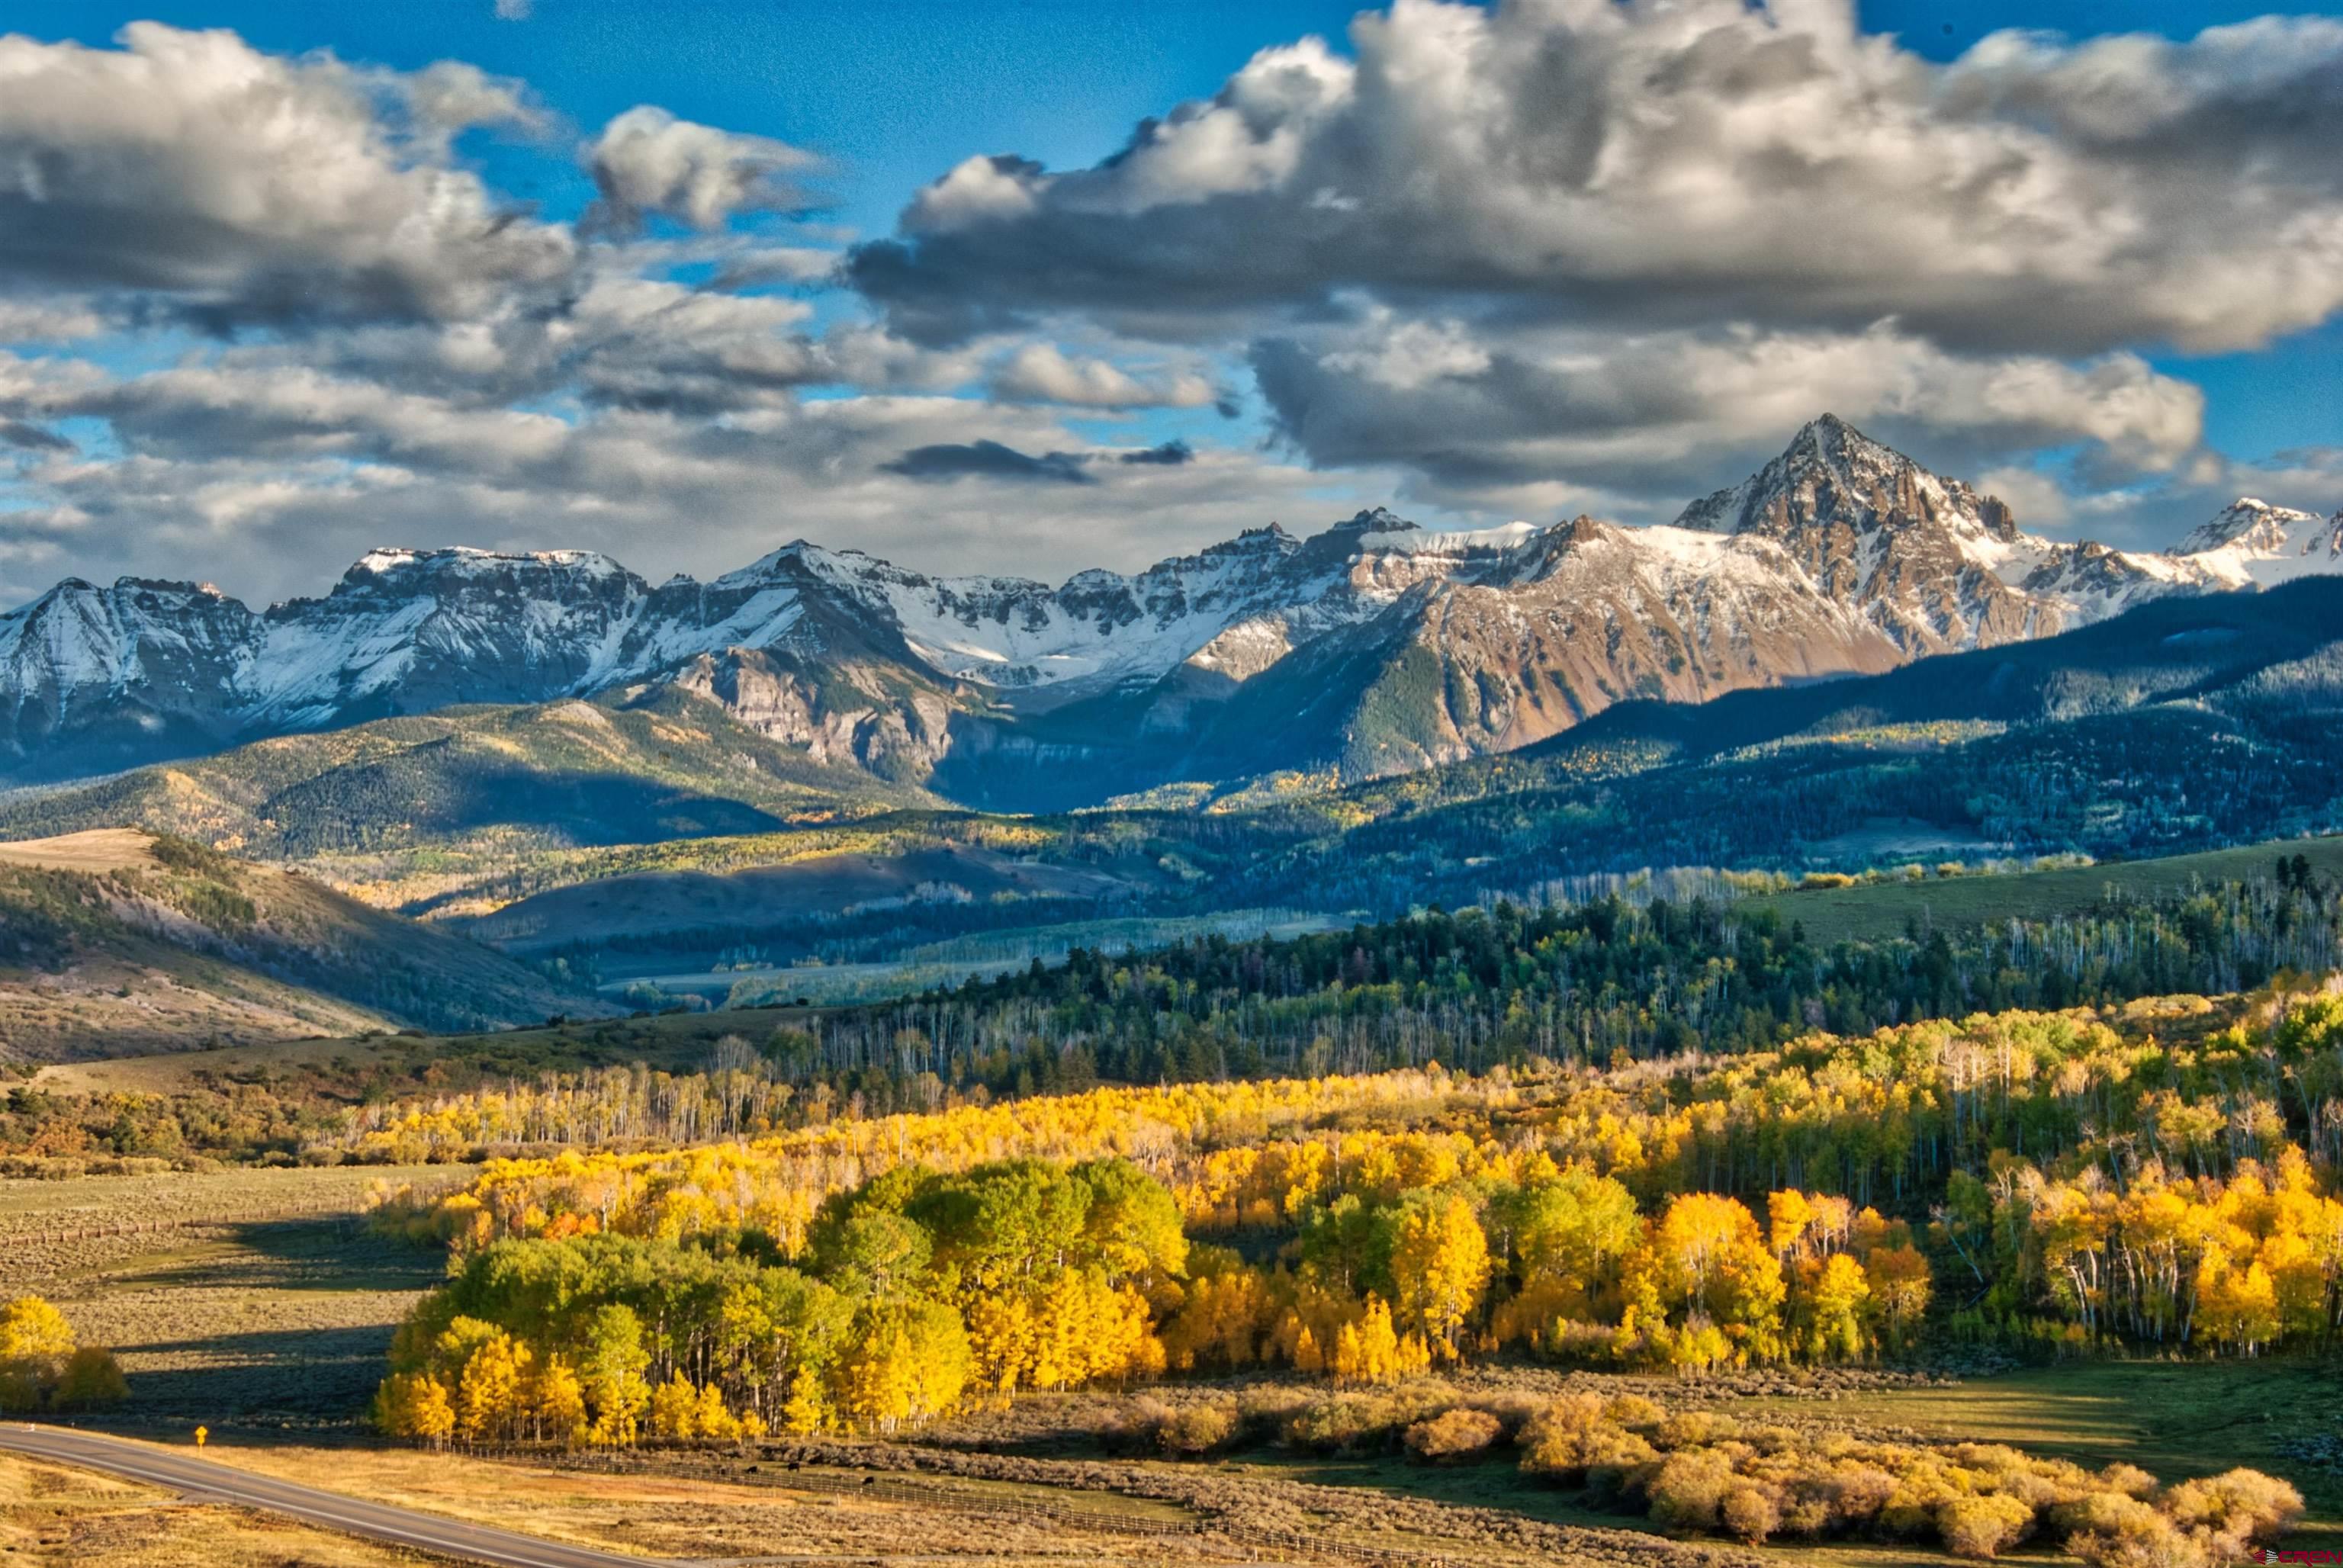 Looking for the ultimate in privacy, security and the best views on Colorado's Western Slope? Here it is! Located at the very top of the iconic Dallas Divide! Colorado Life magazine (September/October 2016) named Snow Drift Ranch on the Dallas Divide as the number one location in the entire State of Colorado to view Autumn colors. Secluded and very private yet has year round access along Colorado Hwy. 62. 15 minutes from Ridgeway and just 35 minutes from Telluride. The home was built in three phases and is truly an engineering marvel. On grid plus there is a total self sufficient off grid option.  This home has so many great features that it would take hours to explain everything. Breathtaking views, comfort and convenience in any event with accessible seclusion. It has everything including a state of the art security system. This gem could easily become a first class equine facility with ample acreage for barns, an arena and pasture. If hunting is what you desire Elk and Mule deer frequent the property and over the counter Elk tags can be bought annually. With the famous Double RL Ranch across Hwy. 62 allowing extremely limited elk hunting, this makes hunting on the Snow Drift Ranch extremely good. Skiers and golfers have the best of both Worlds! Telluride with it's World famous skiing, dining and shopping is just a short drive away and the Divide Golf club which offers memberships and is open to the public is minutes away from your front door! And of course Ridgeway being just fifteen minutes away has it's offerings, shopping, farmers market, festivals and Rodeos to entertain the whole family. The amazing home could accommodate a large family and guests or could serve as a corporate retreat/meeting facility.